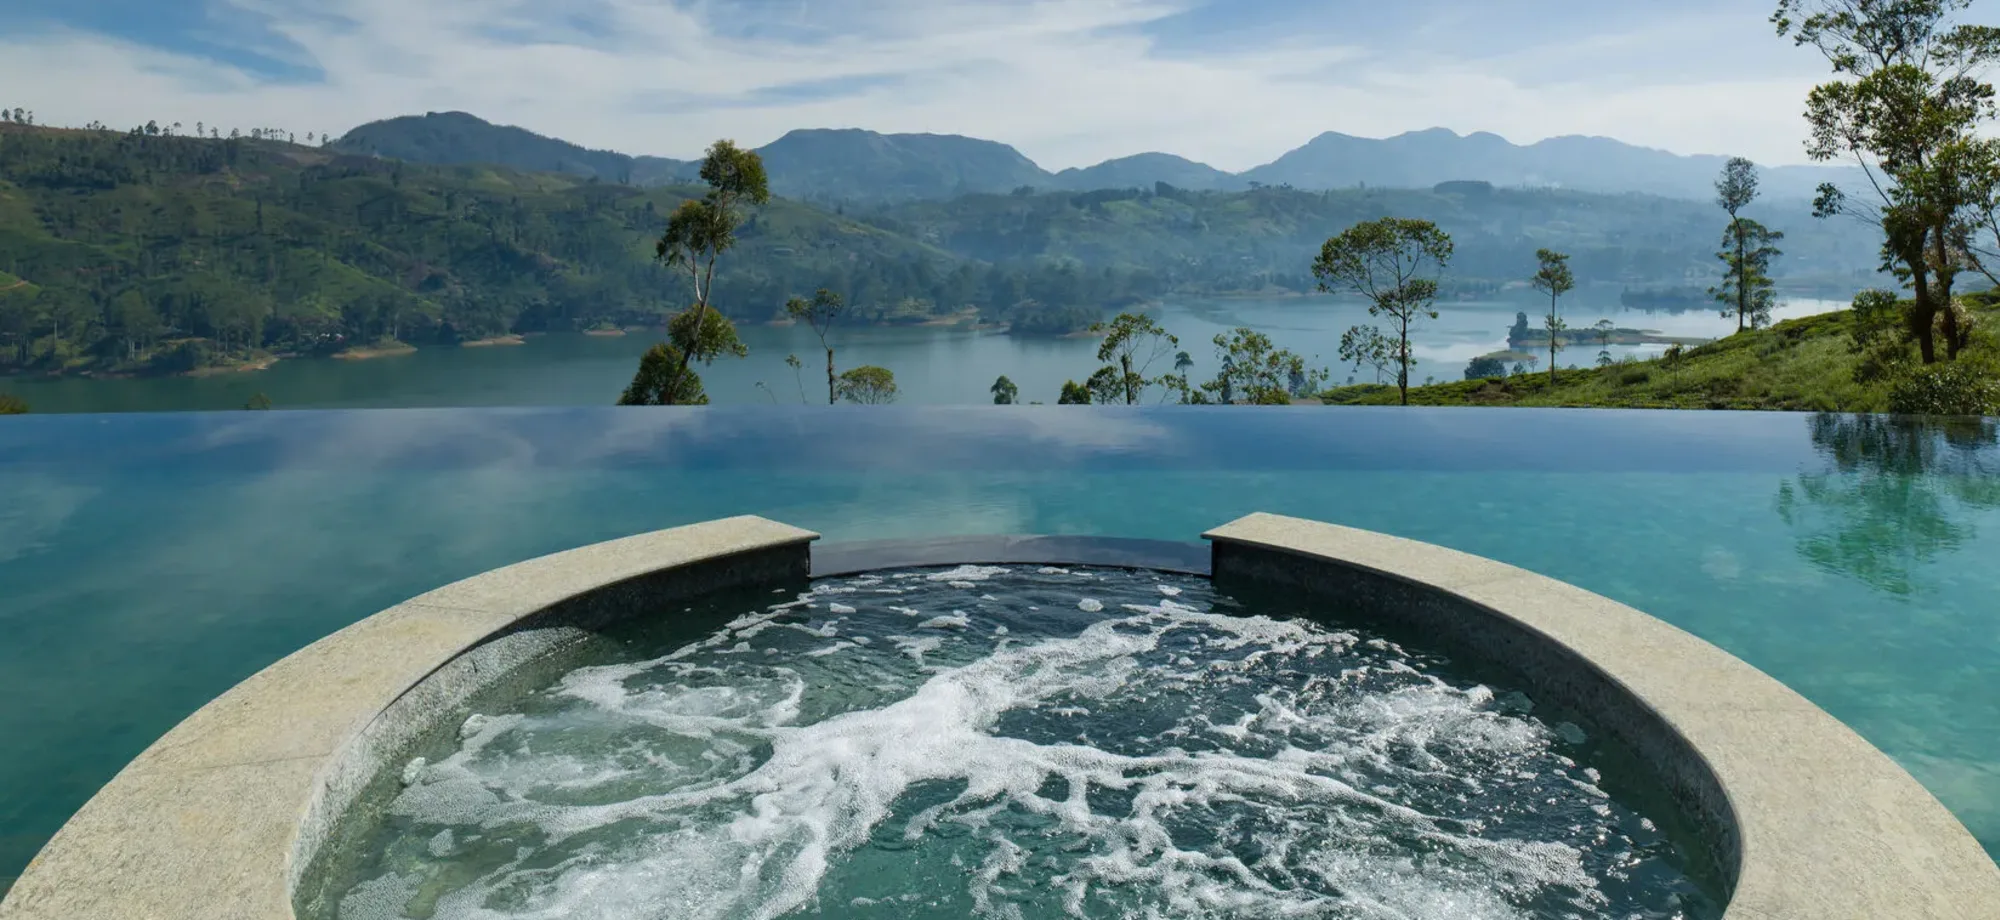 The infinity pool at Dunkeld Bungalow overlooks a mesmerising panorama of the lake and surrounding hills.